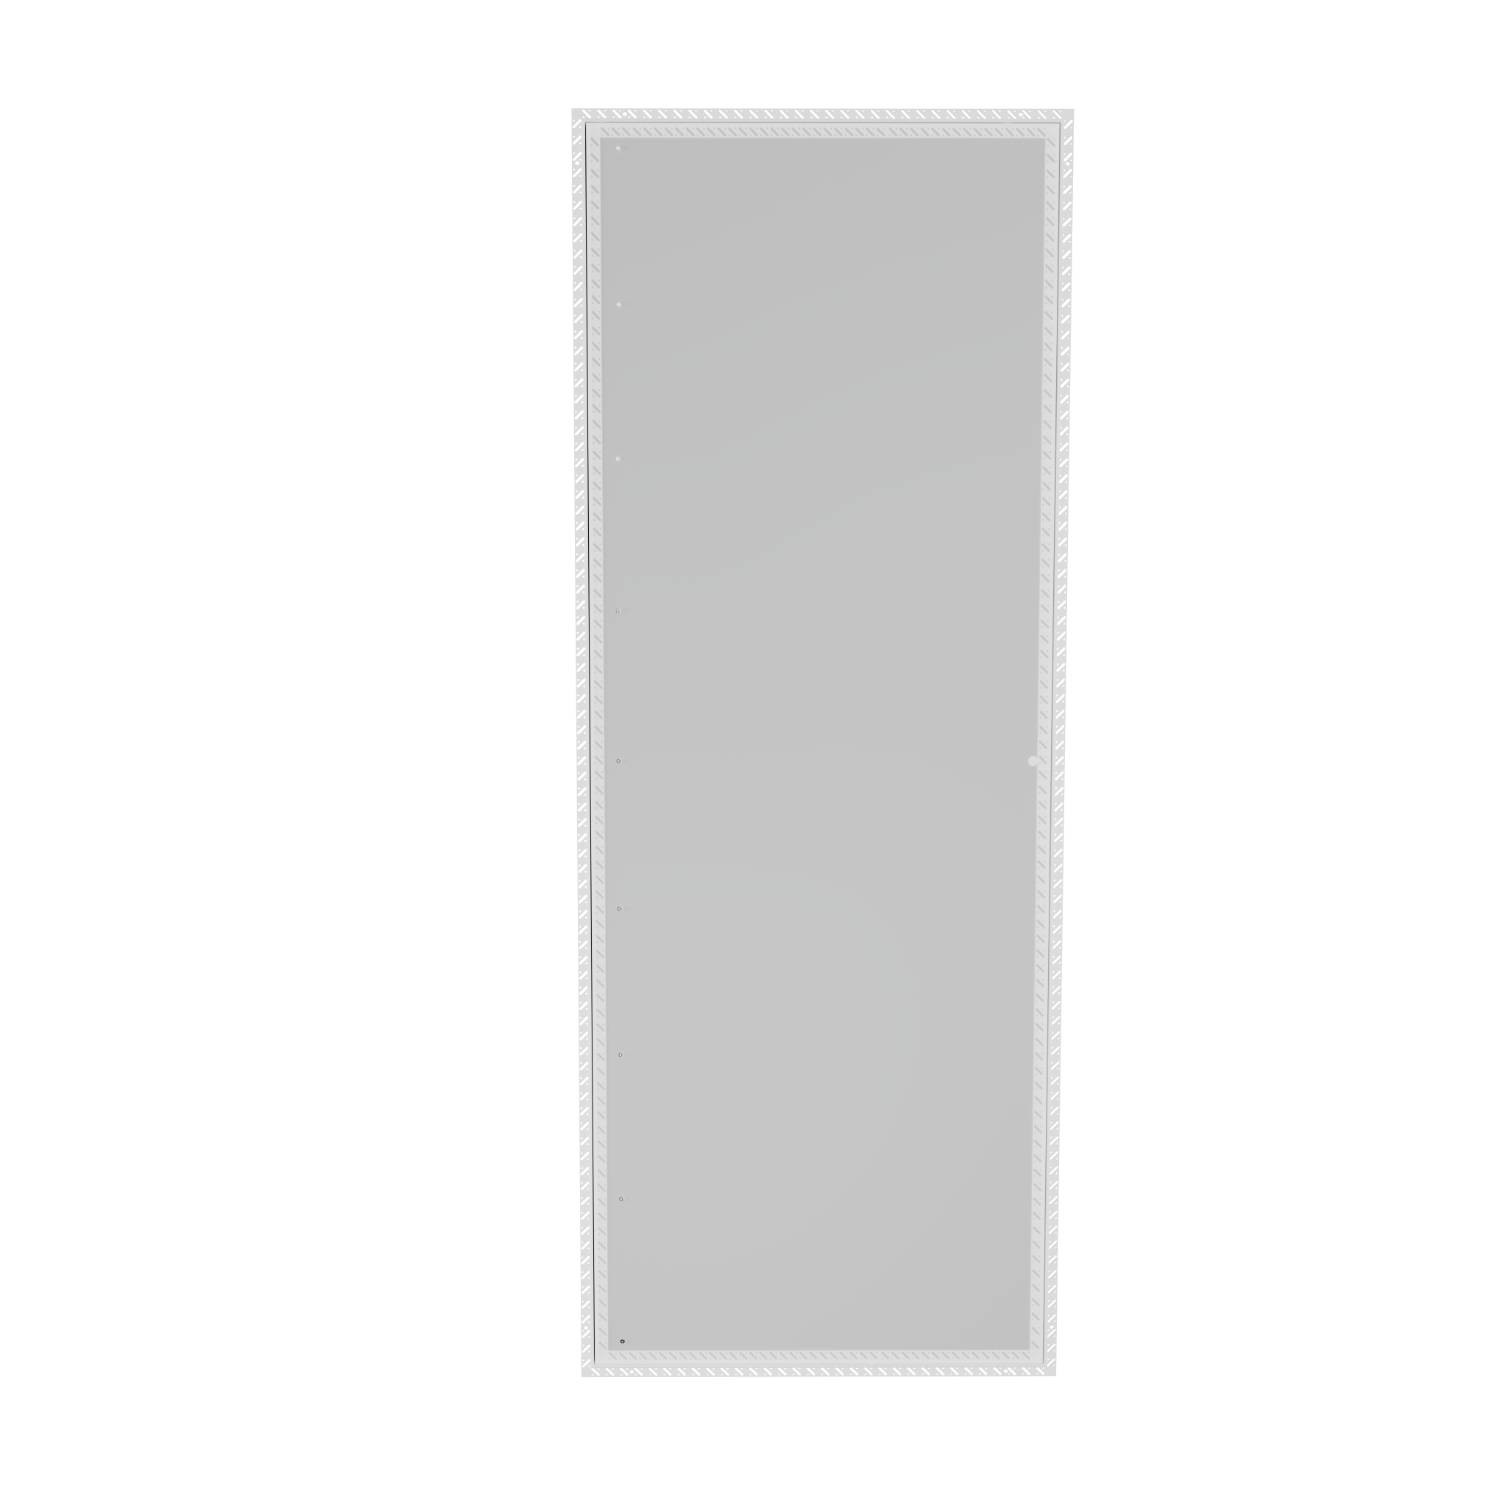 Plasterboard Riser Door (EX53 Range) - Beaded Frame - Non Fire Rated - Strengthened Touch Catch - Wall Access Panel